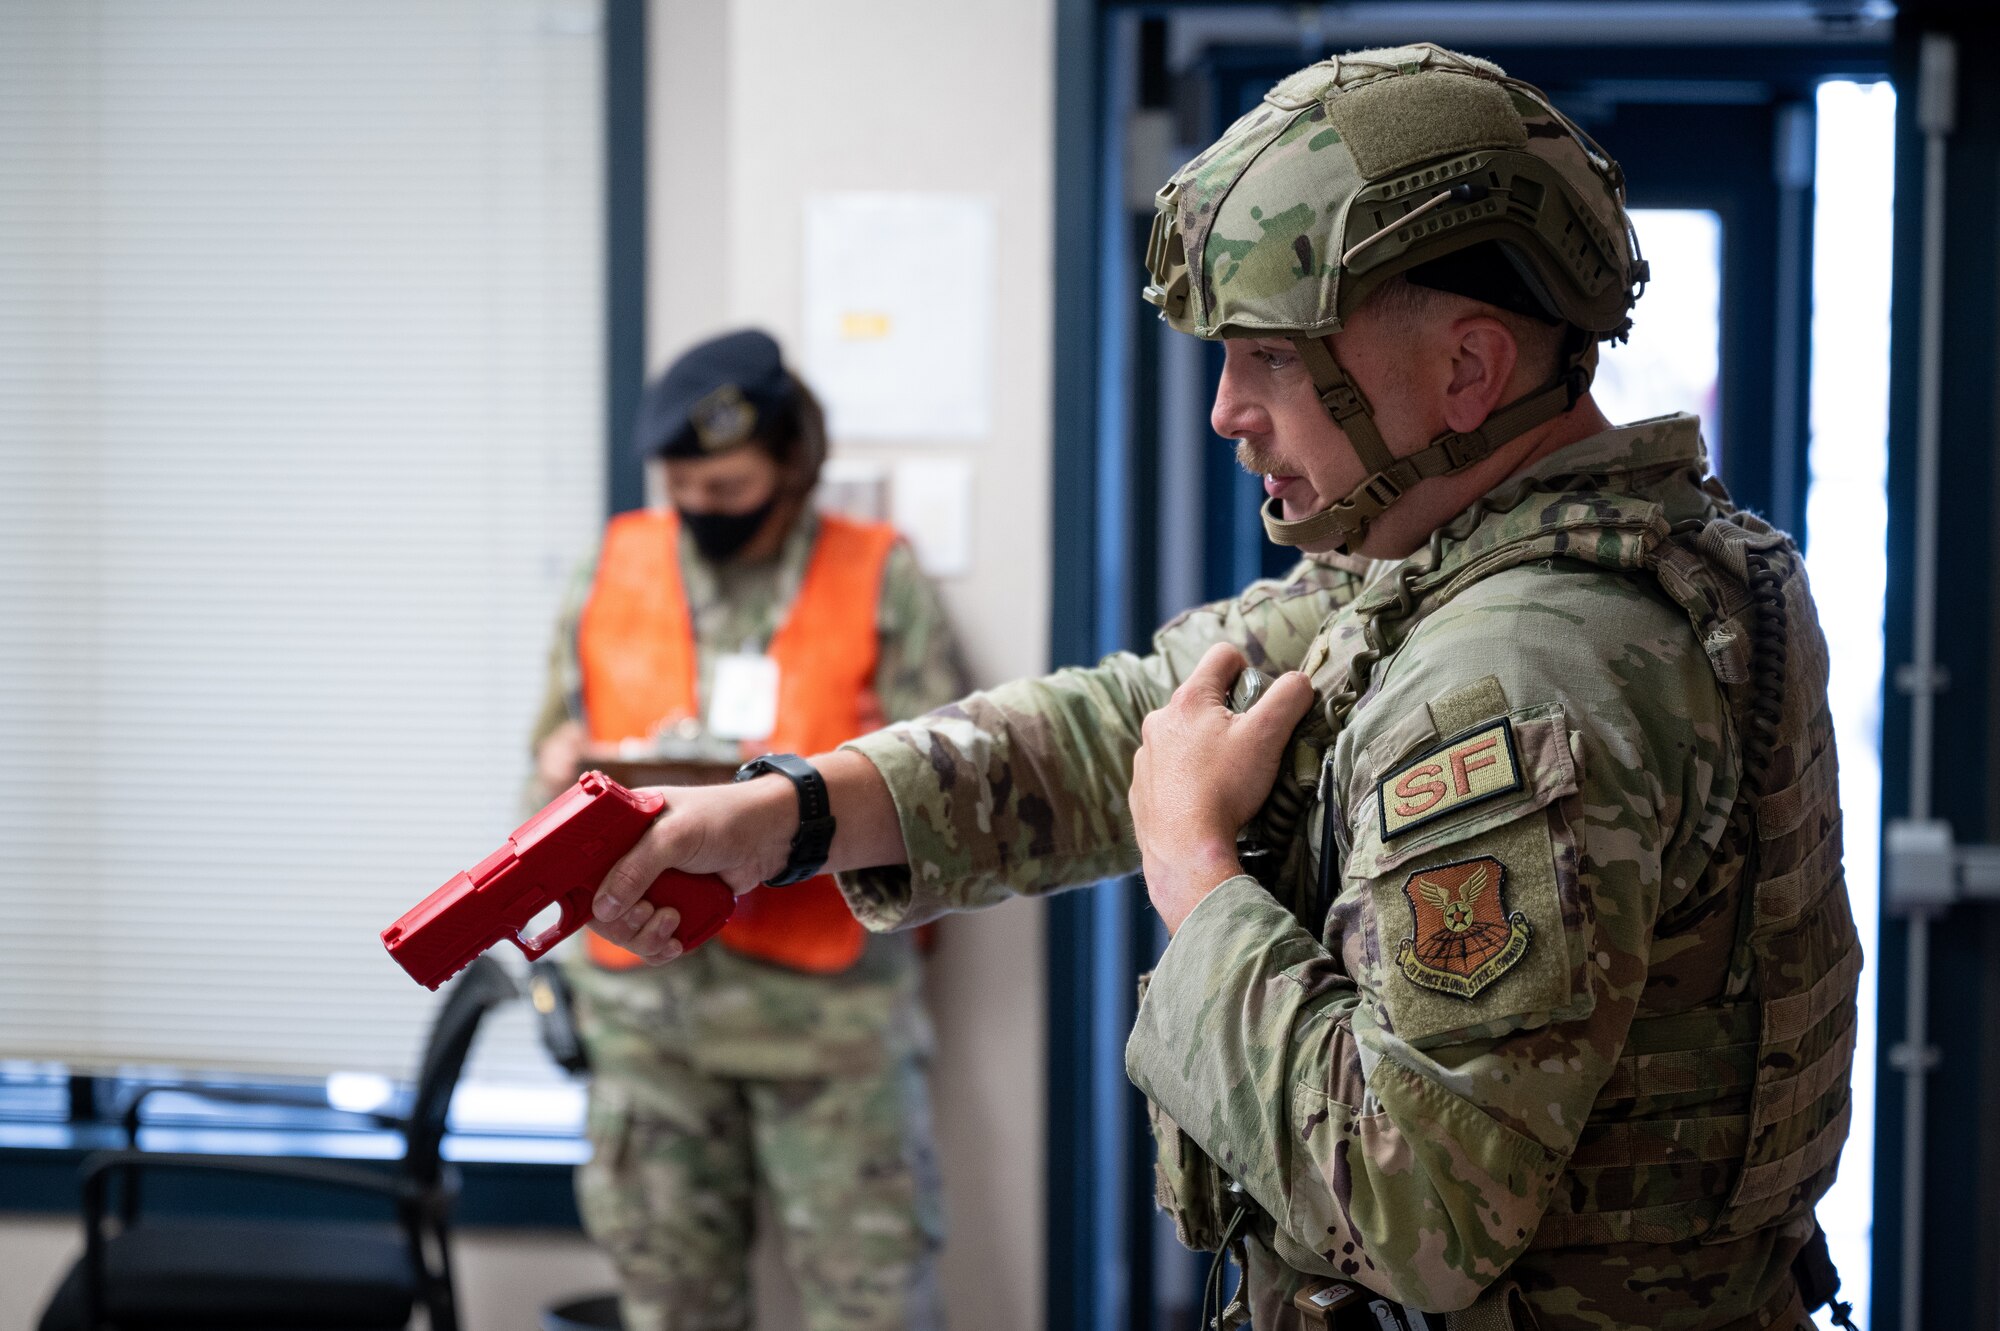 Tech. Sgt. Jacob Udell, 2nd Security Forces Squadron flight sergeant, draws a weapon on a hostile during an active shooter exercise at Barksdale Air Force Base, Louisiana, Sept. 16, 2021. The exercise was designed to evaluate the training, readiness and capability of Barksdale’s first responders in order to effectively respond to active shooter threats to the installation. (U.S. Air Force photo by Airman 1st Class Jonathan E. Ramos)